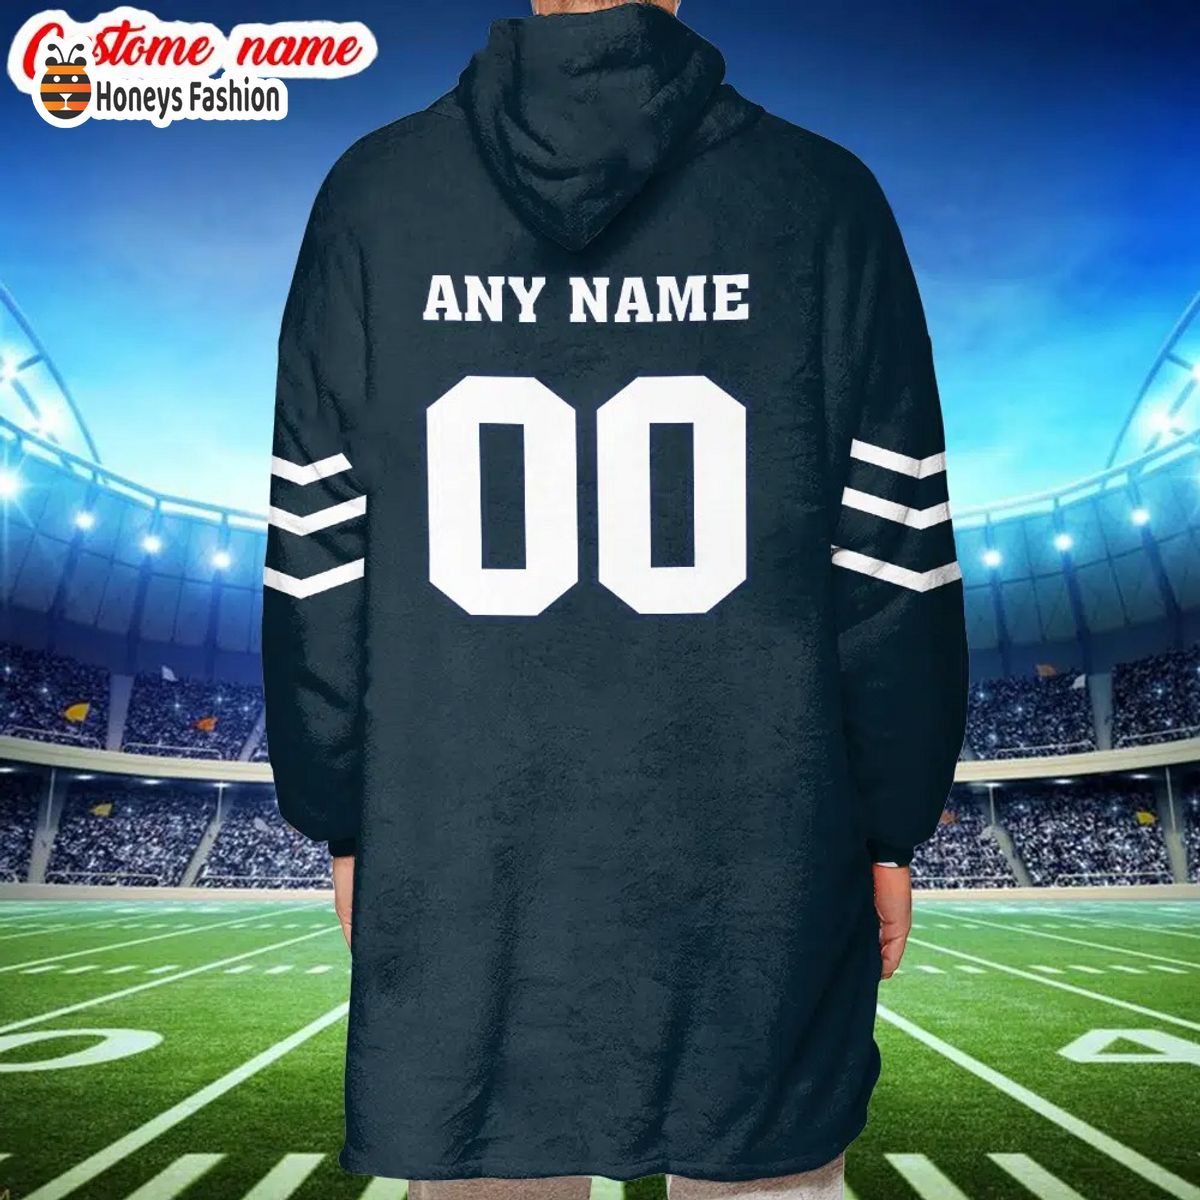 Houston Texans NFL Adidas all day i dream about Texans blanket hoodie